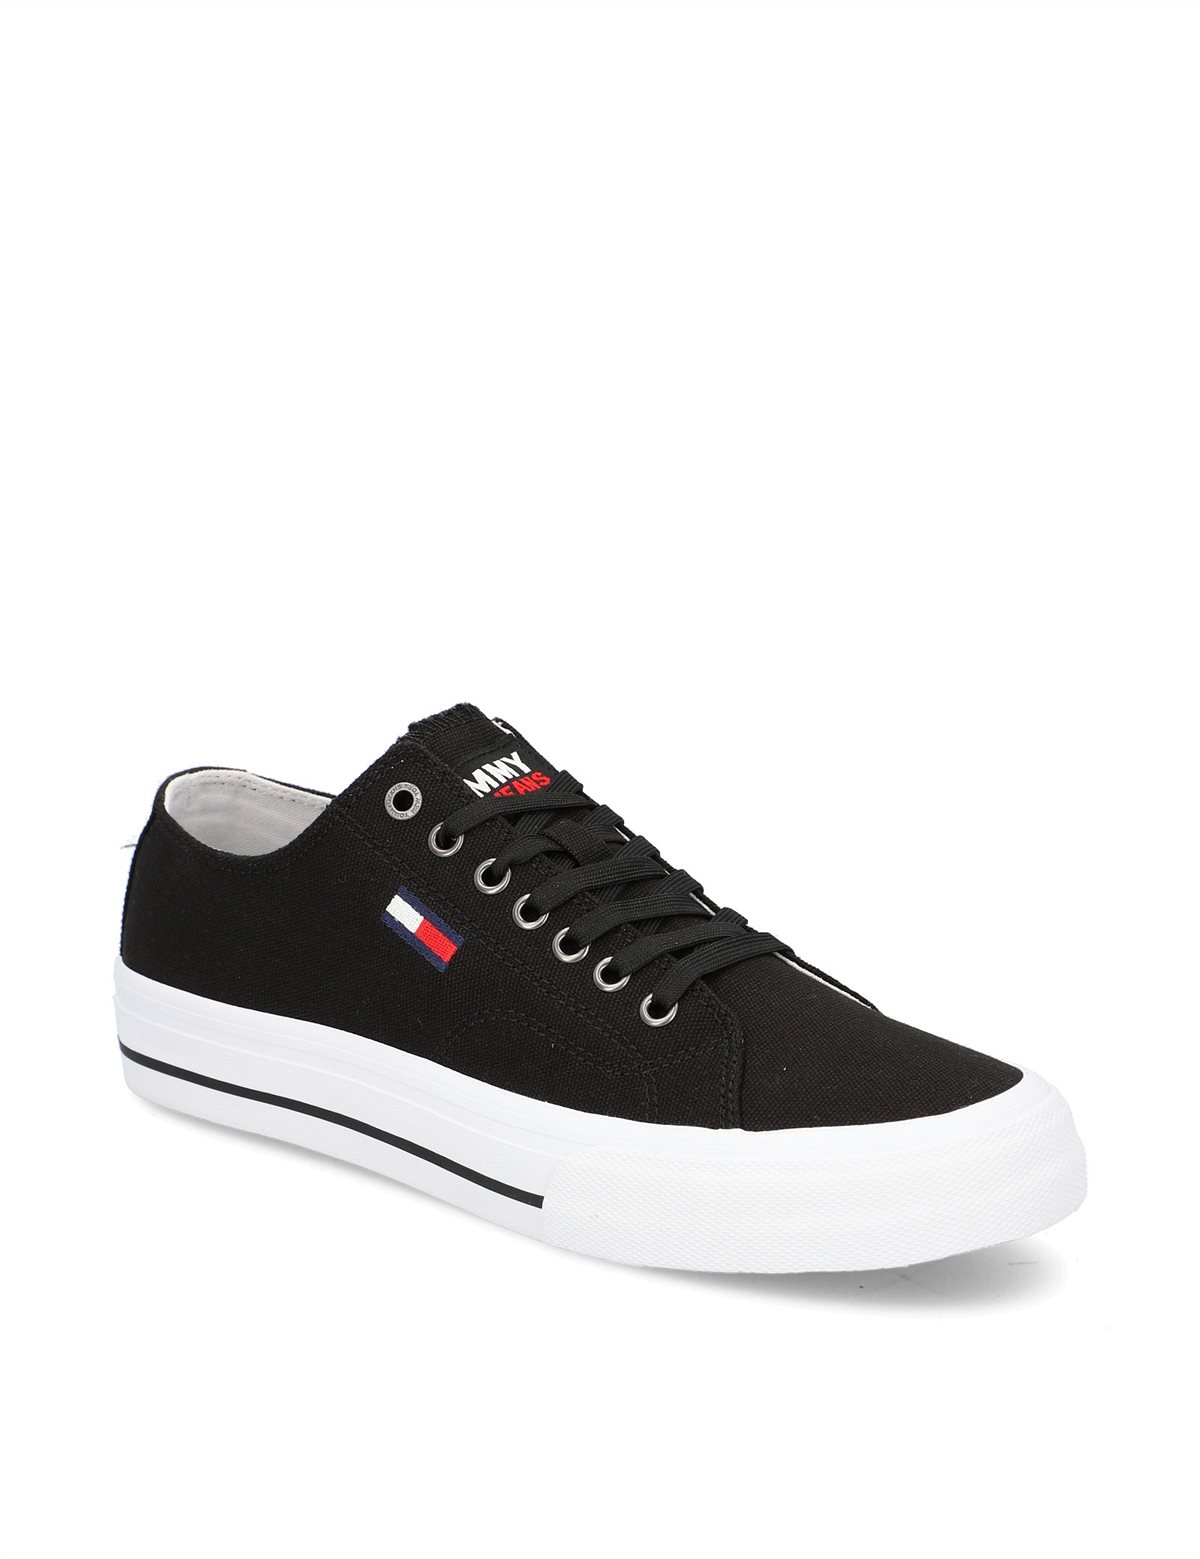 HUMANIC 01 Tommy Hilfiger Canvas Sneaker EUR 69,95 2421109130